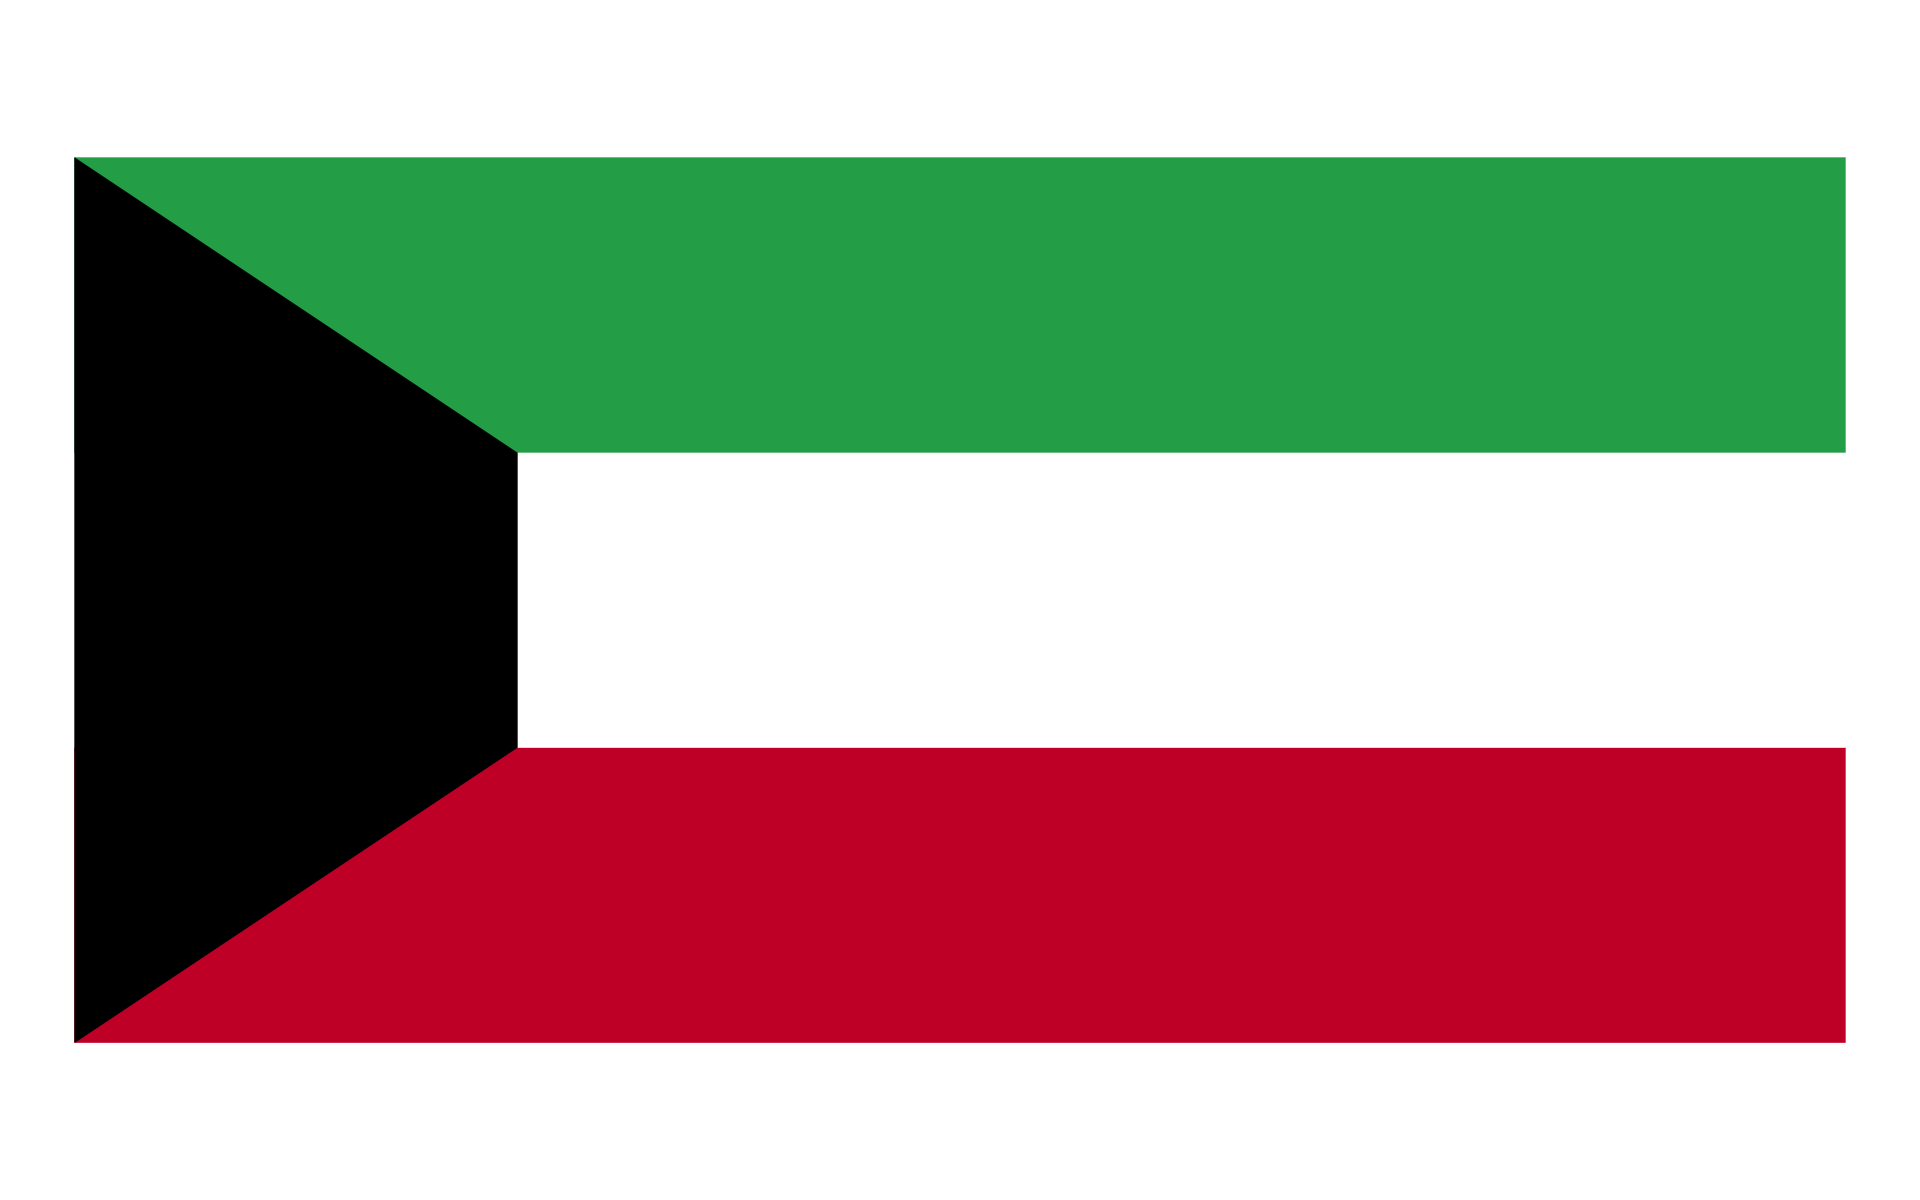 Kuwait Flag wallpapers